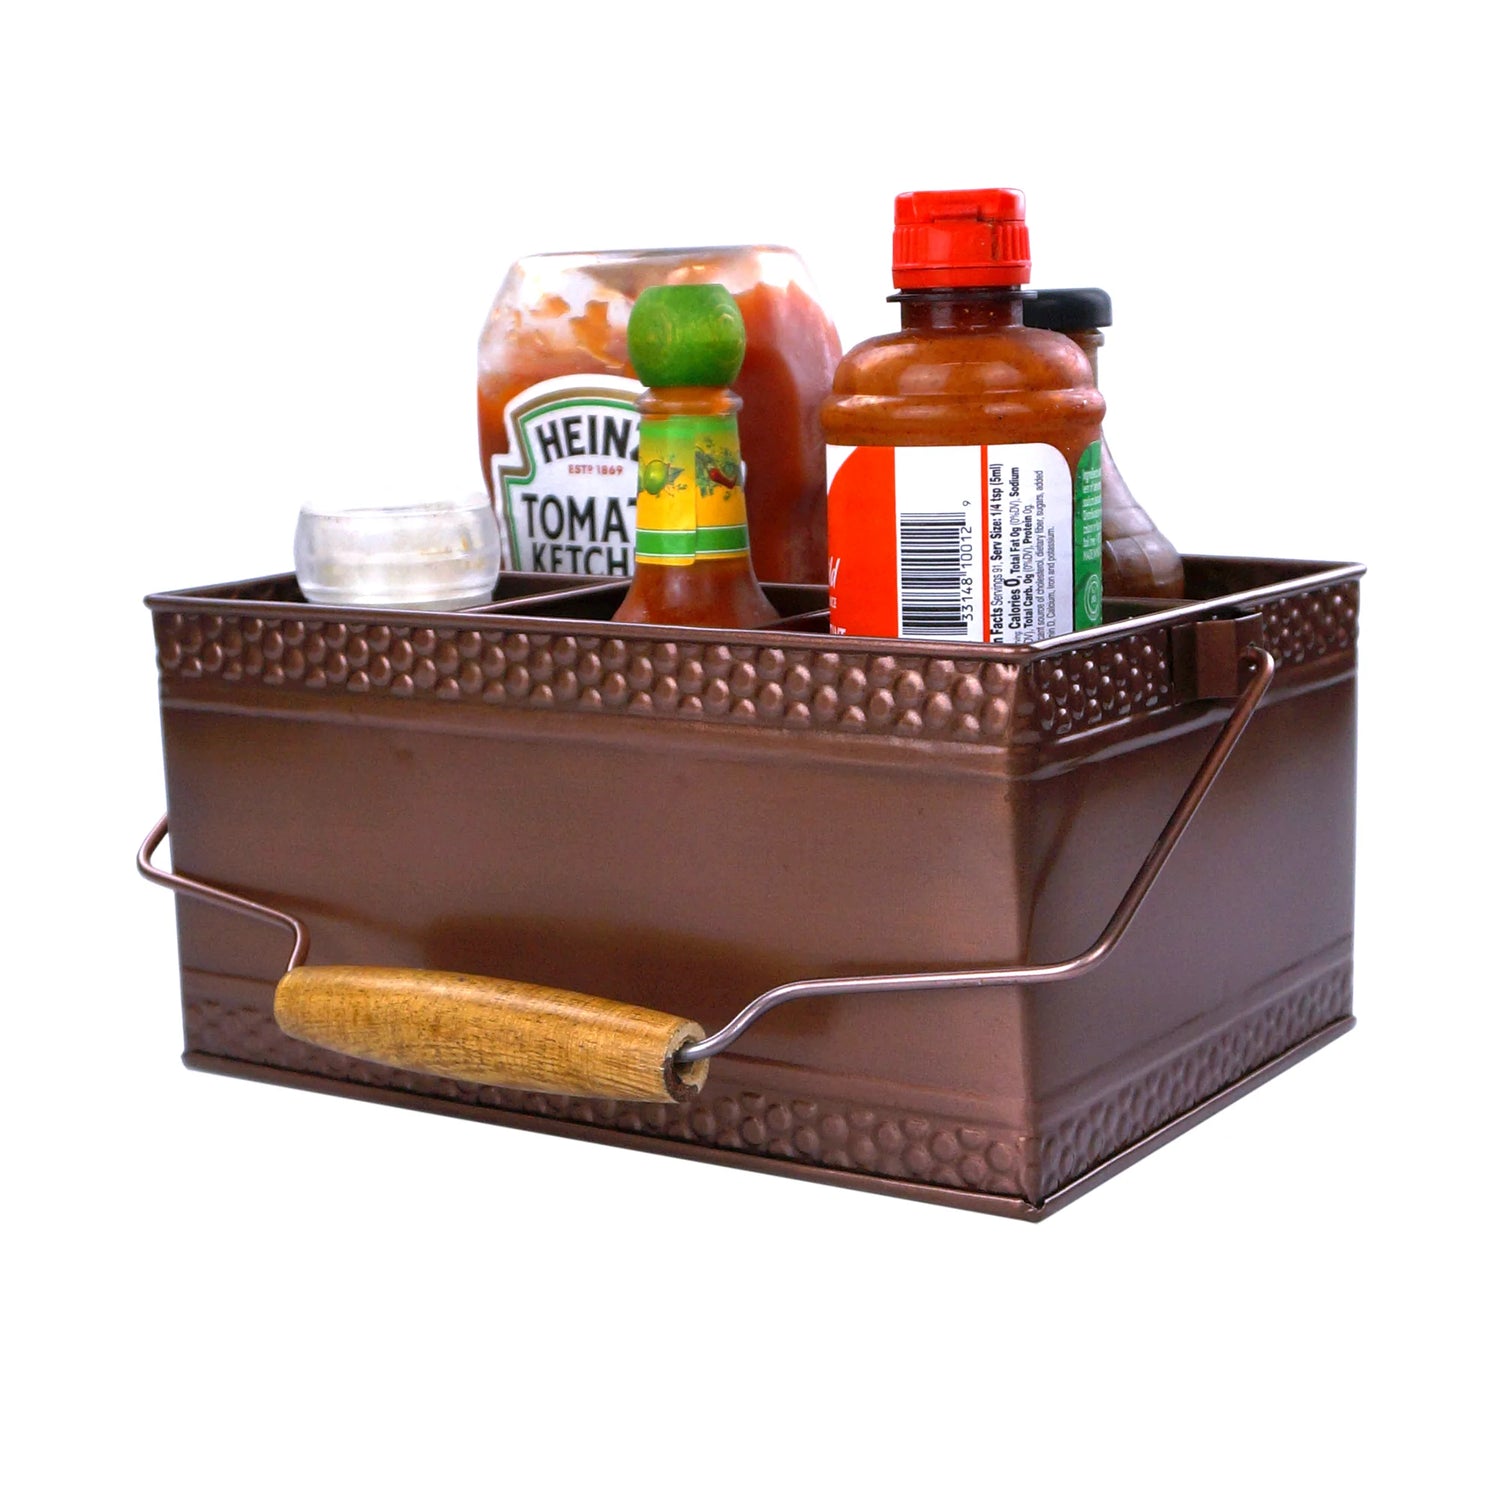 Condiment caddy to hold catsup, sauces, napkins, or utensils.  Great for party use in the kitchen or on the patio.  Made of metal with copper color and glossy easy to clean finish.